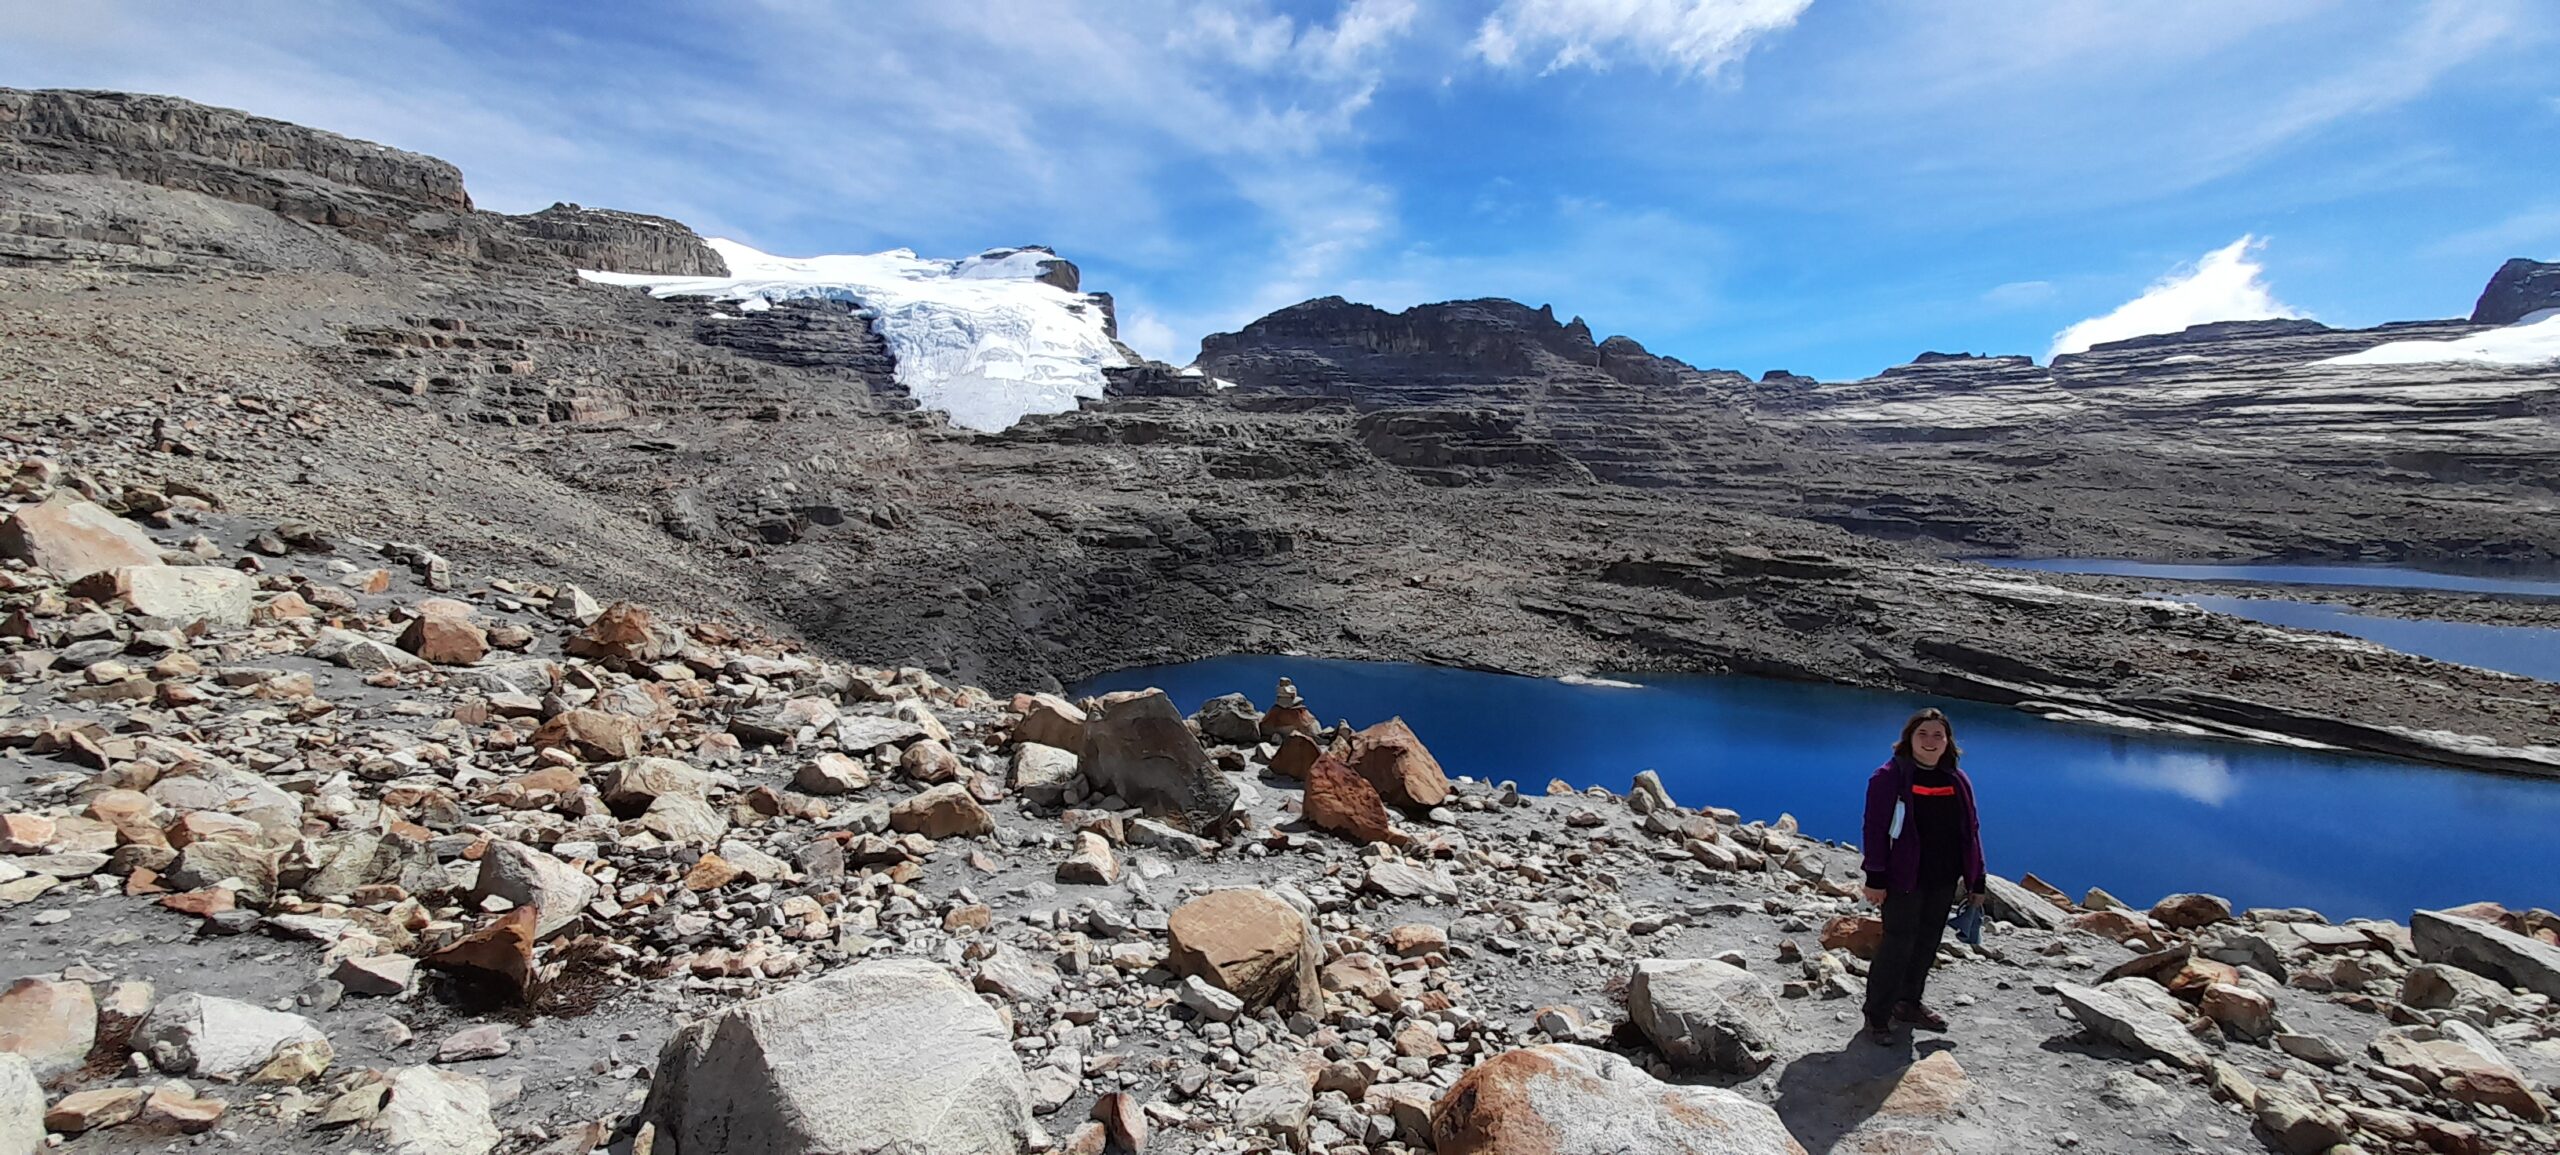 The rugged scenery of Laguna Grande, at 4,400 metres, on the roof of Colombia.